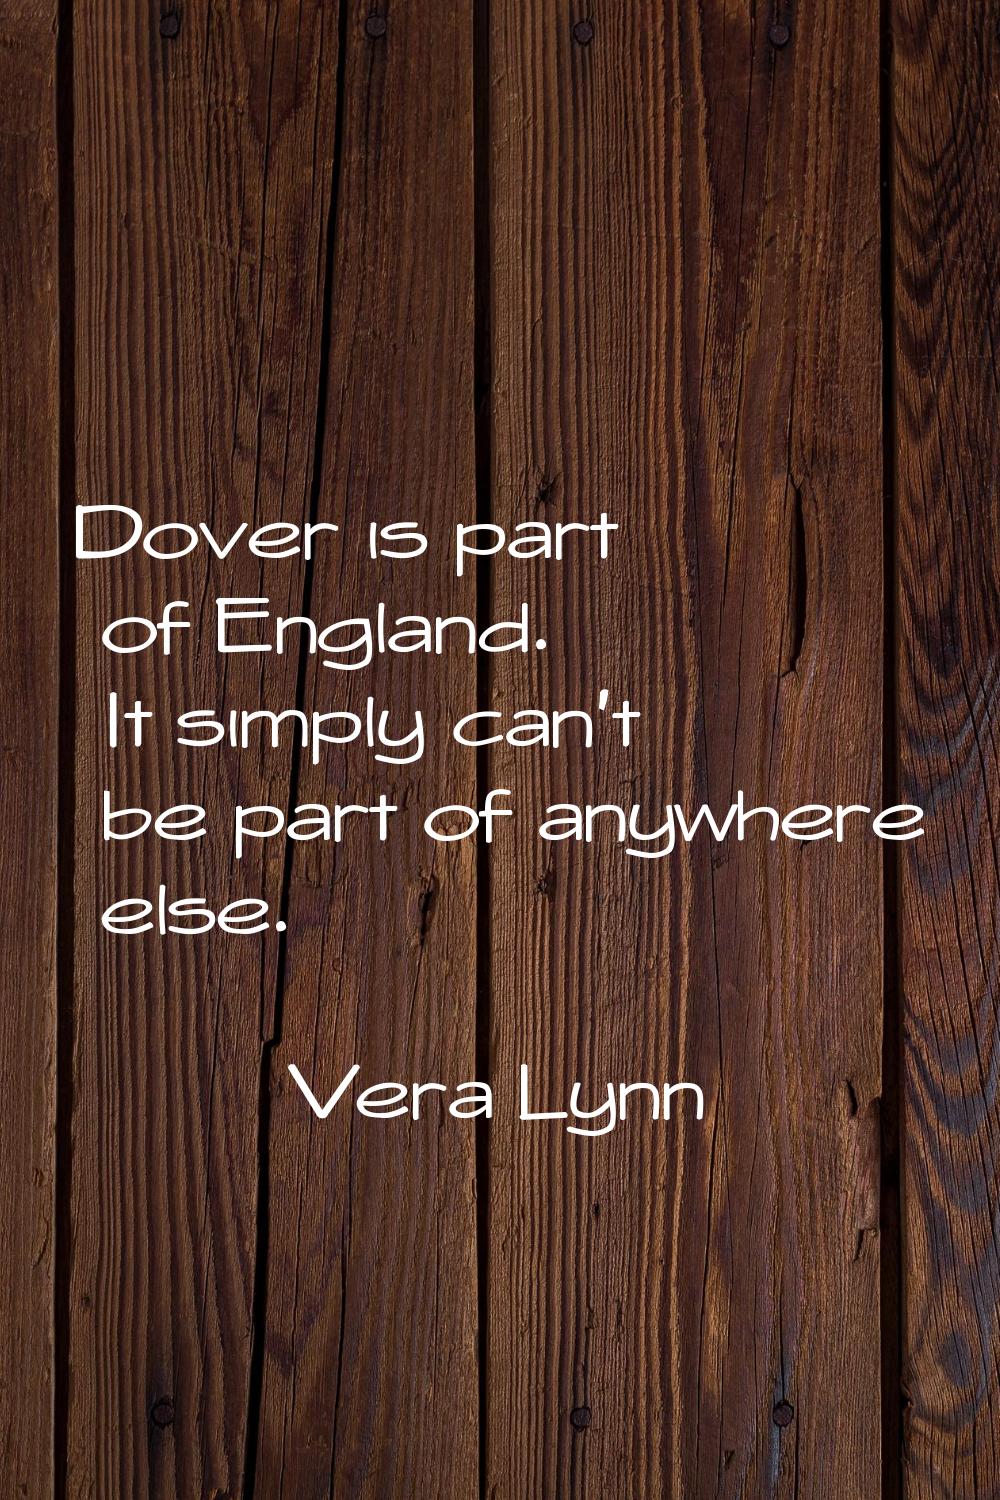 Dover is part of England. It simply can't be part of anywhere else.